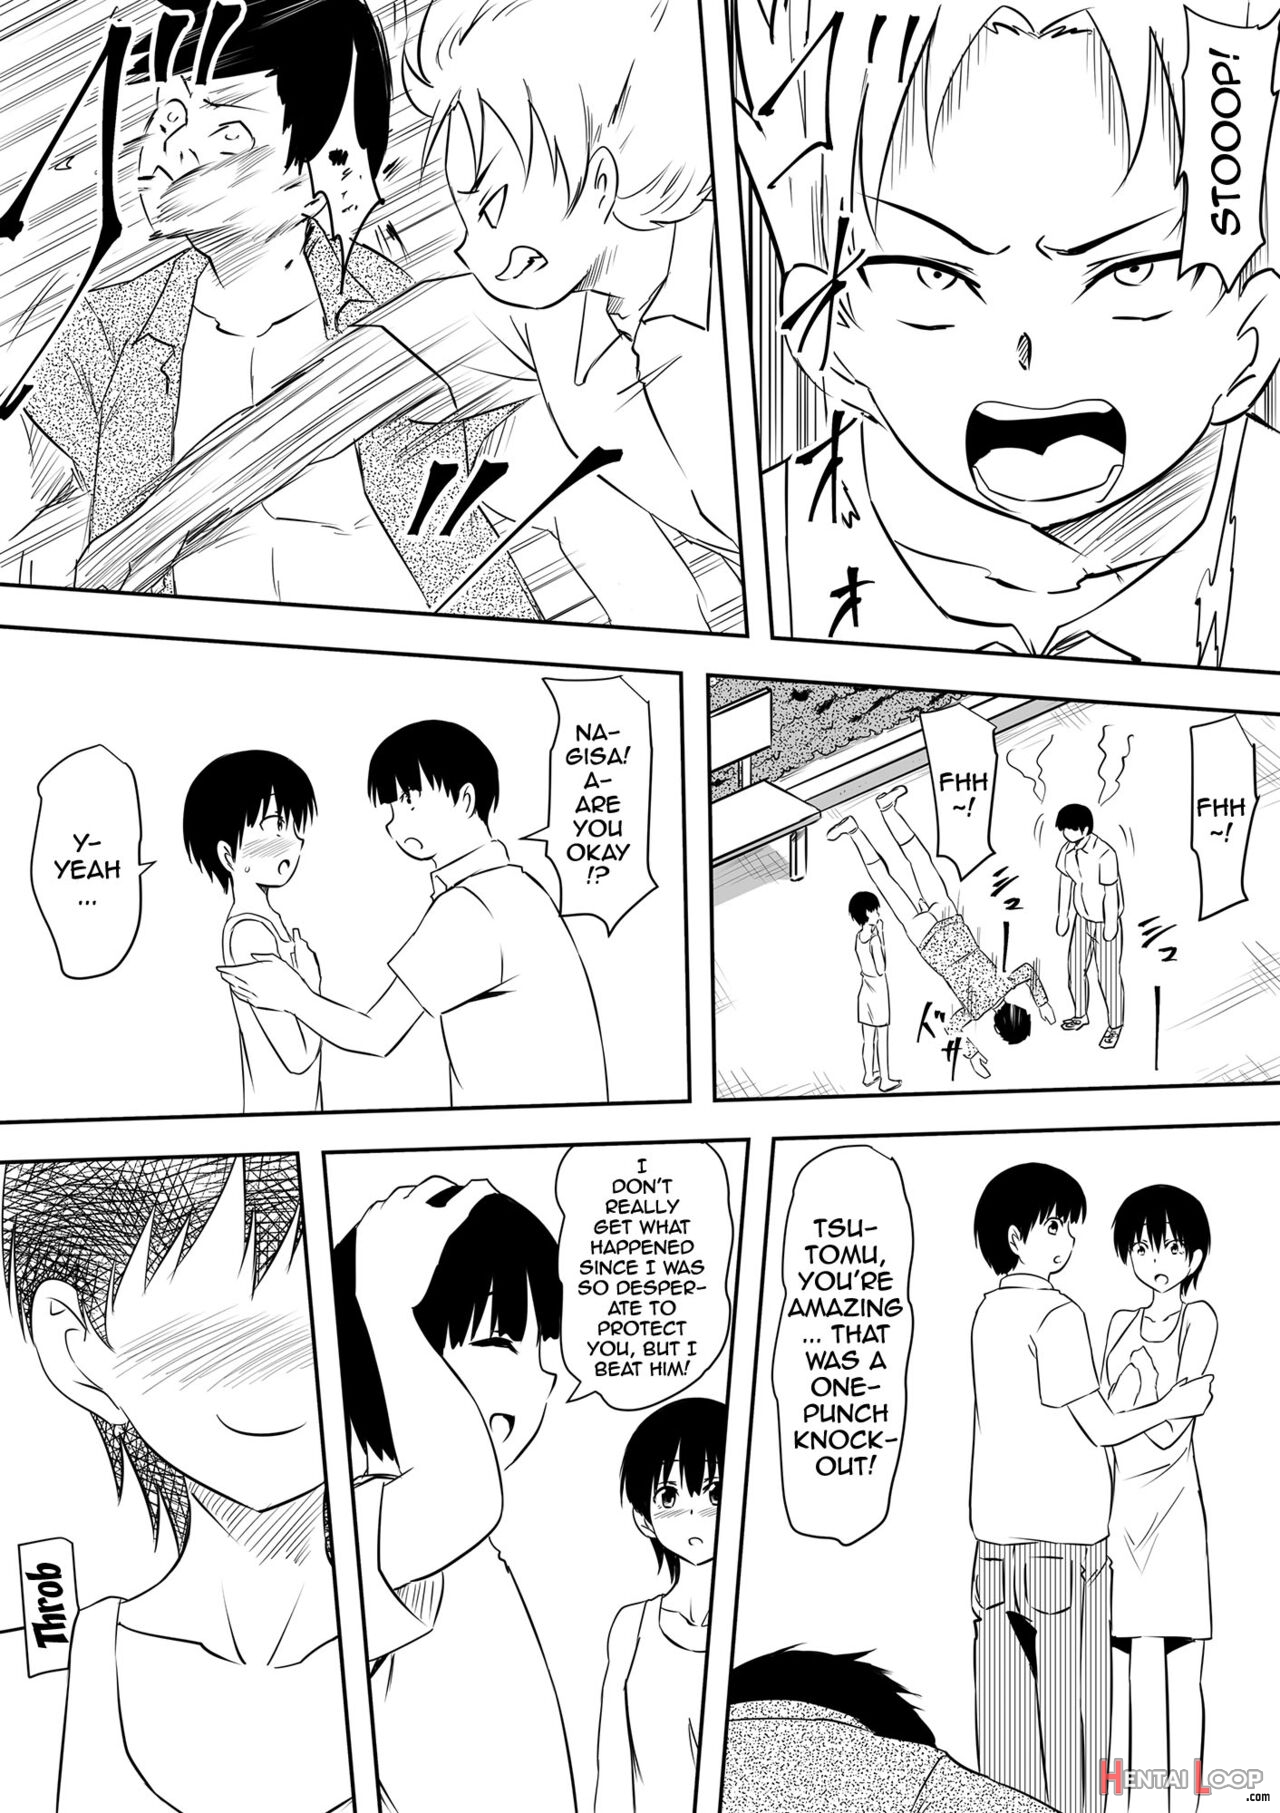 Development Records Of An Asocial Otaku And A Brown Tomboy Going At It Over And Over page 16